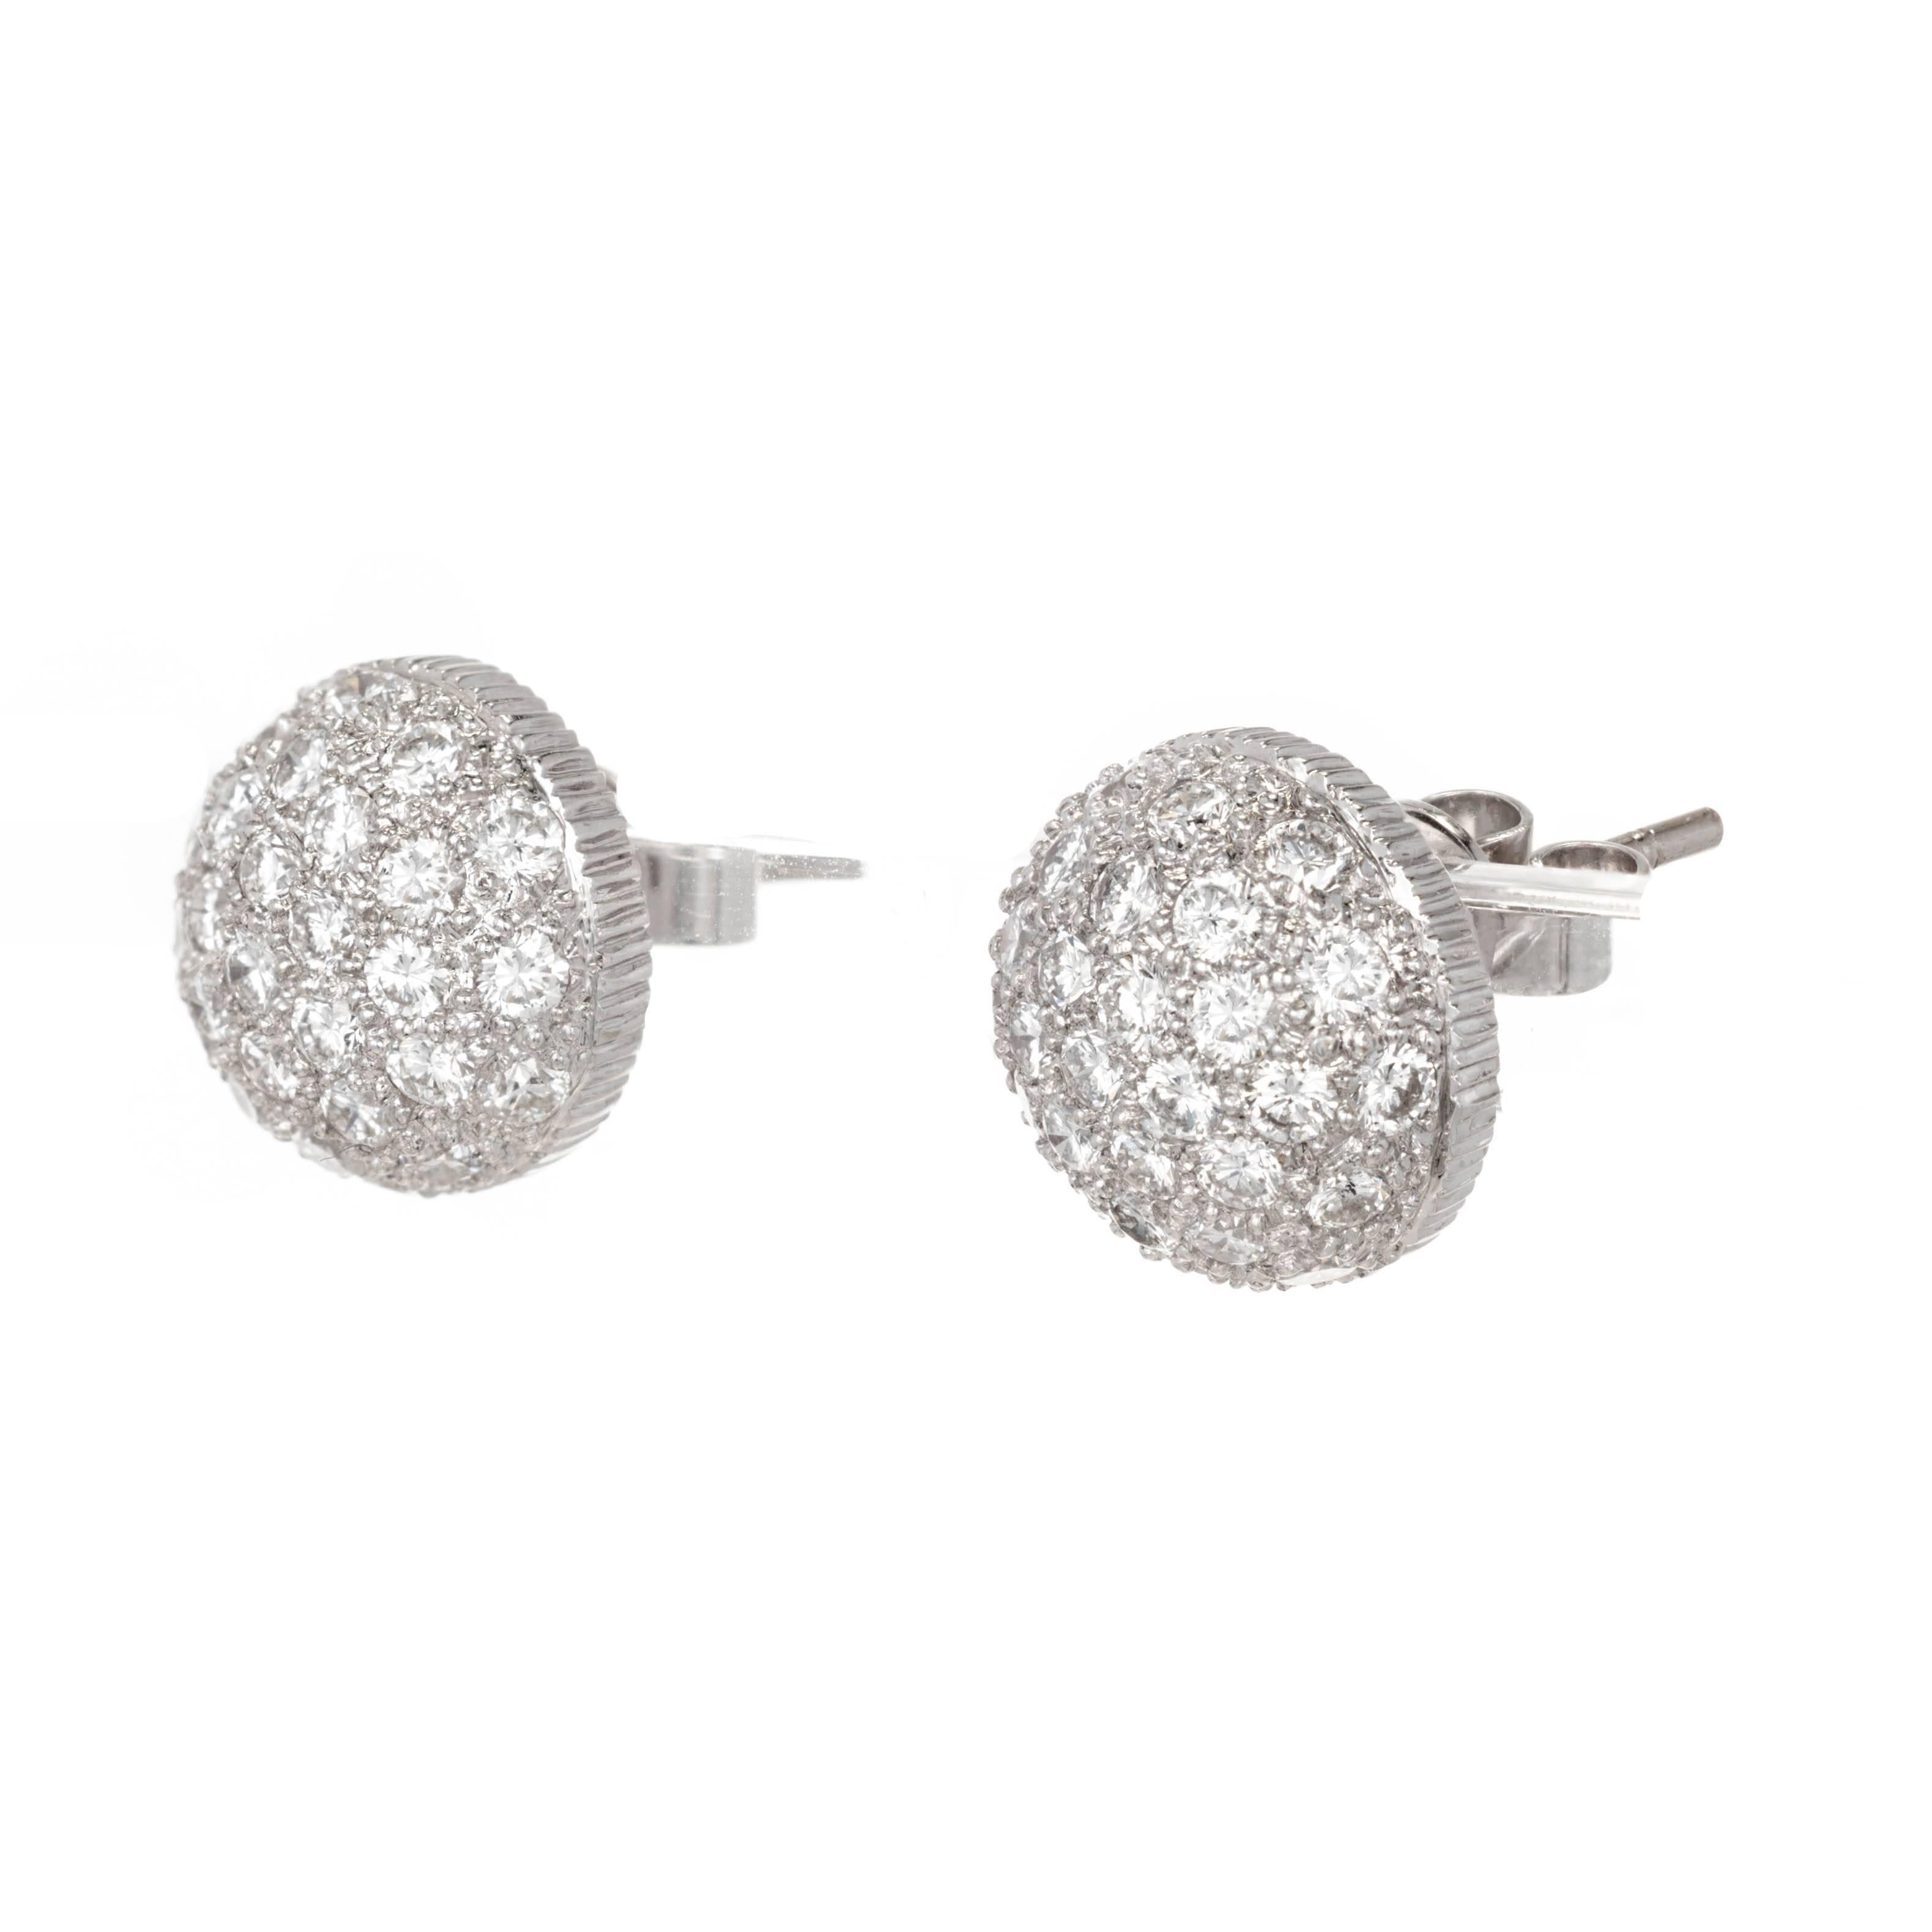 High dome full cut 18k white gold diamond cluster dome earrings. Bright white and shiny. Great 3 dimensional look.

Approx. 70 full cut diamonds, approx. total weight 1.50cts, F – G, VS1 – SI1
18k white gold
4.8 grams
Tested: 18k
Stamped: 18k